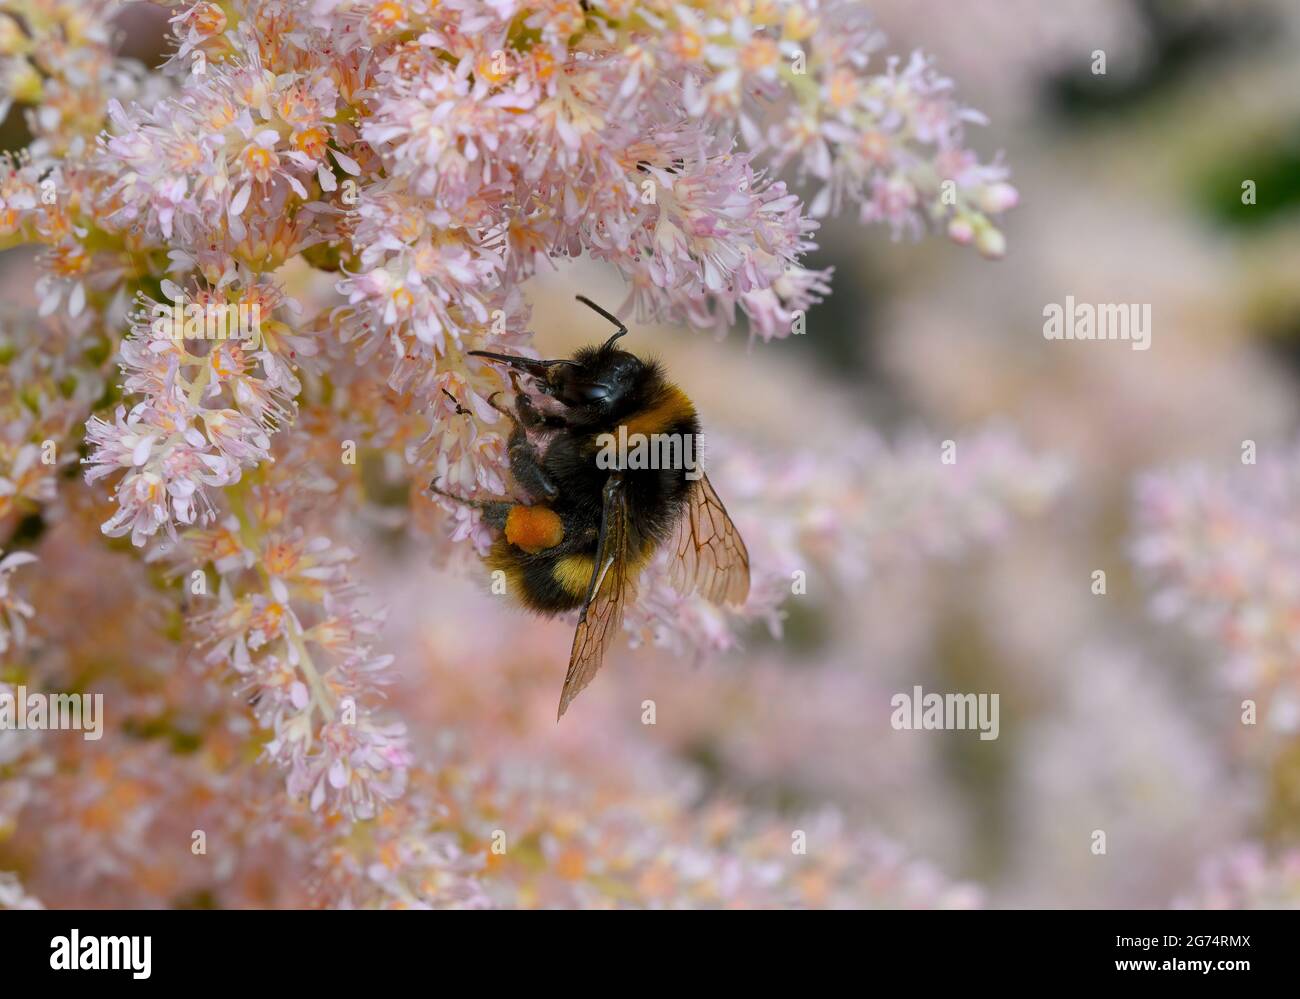 A White-Tailed Bumble Bee pollinating a pink Astilbe flower Stock Photo